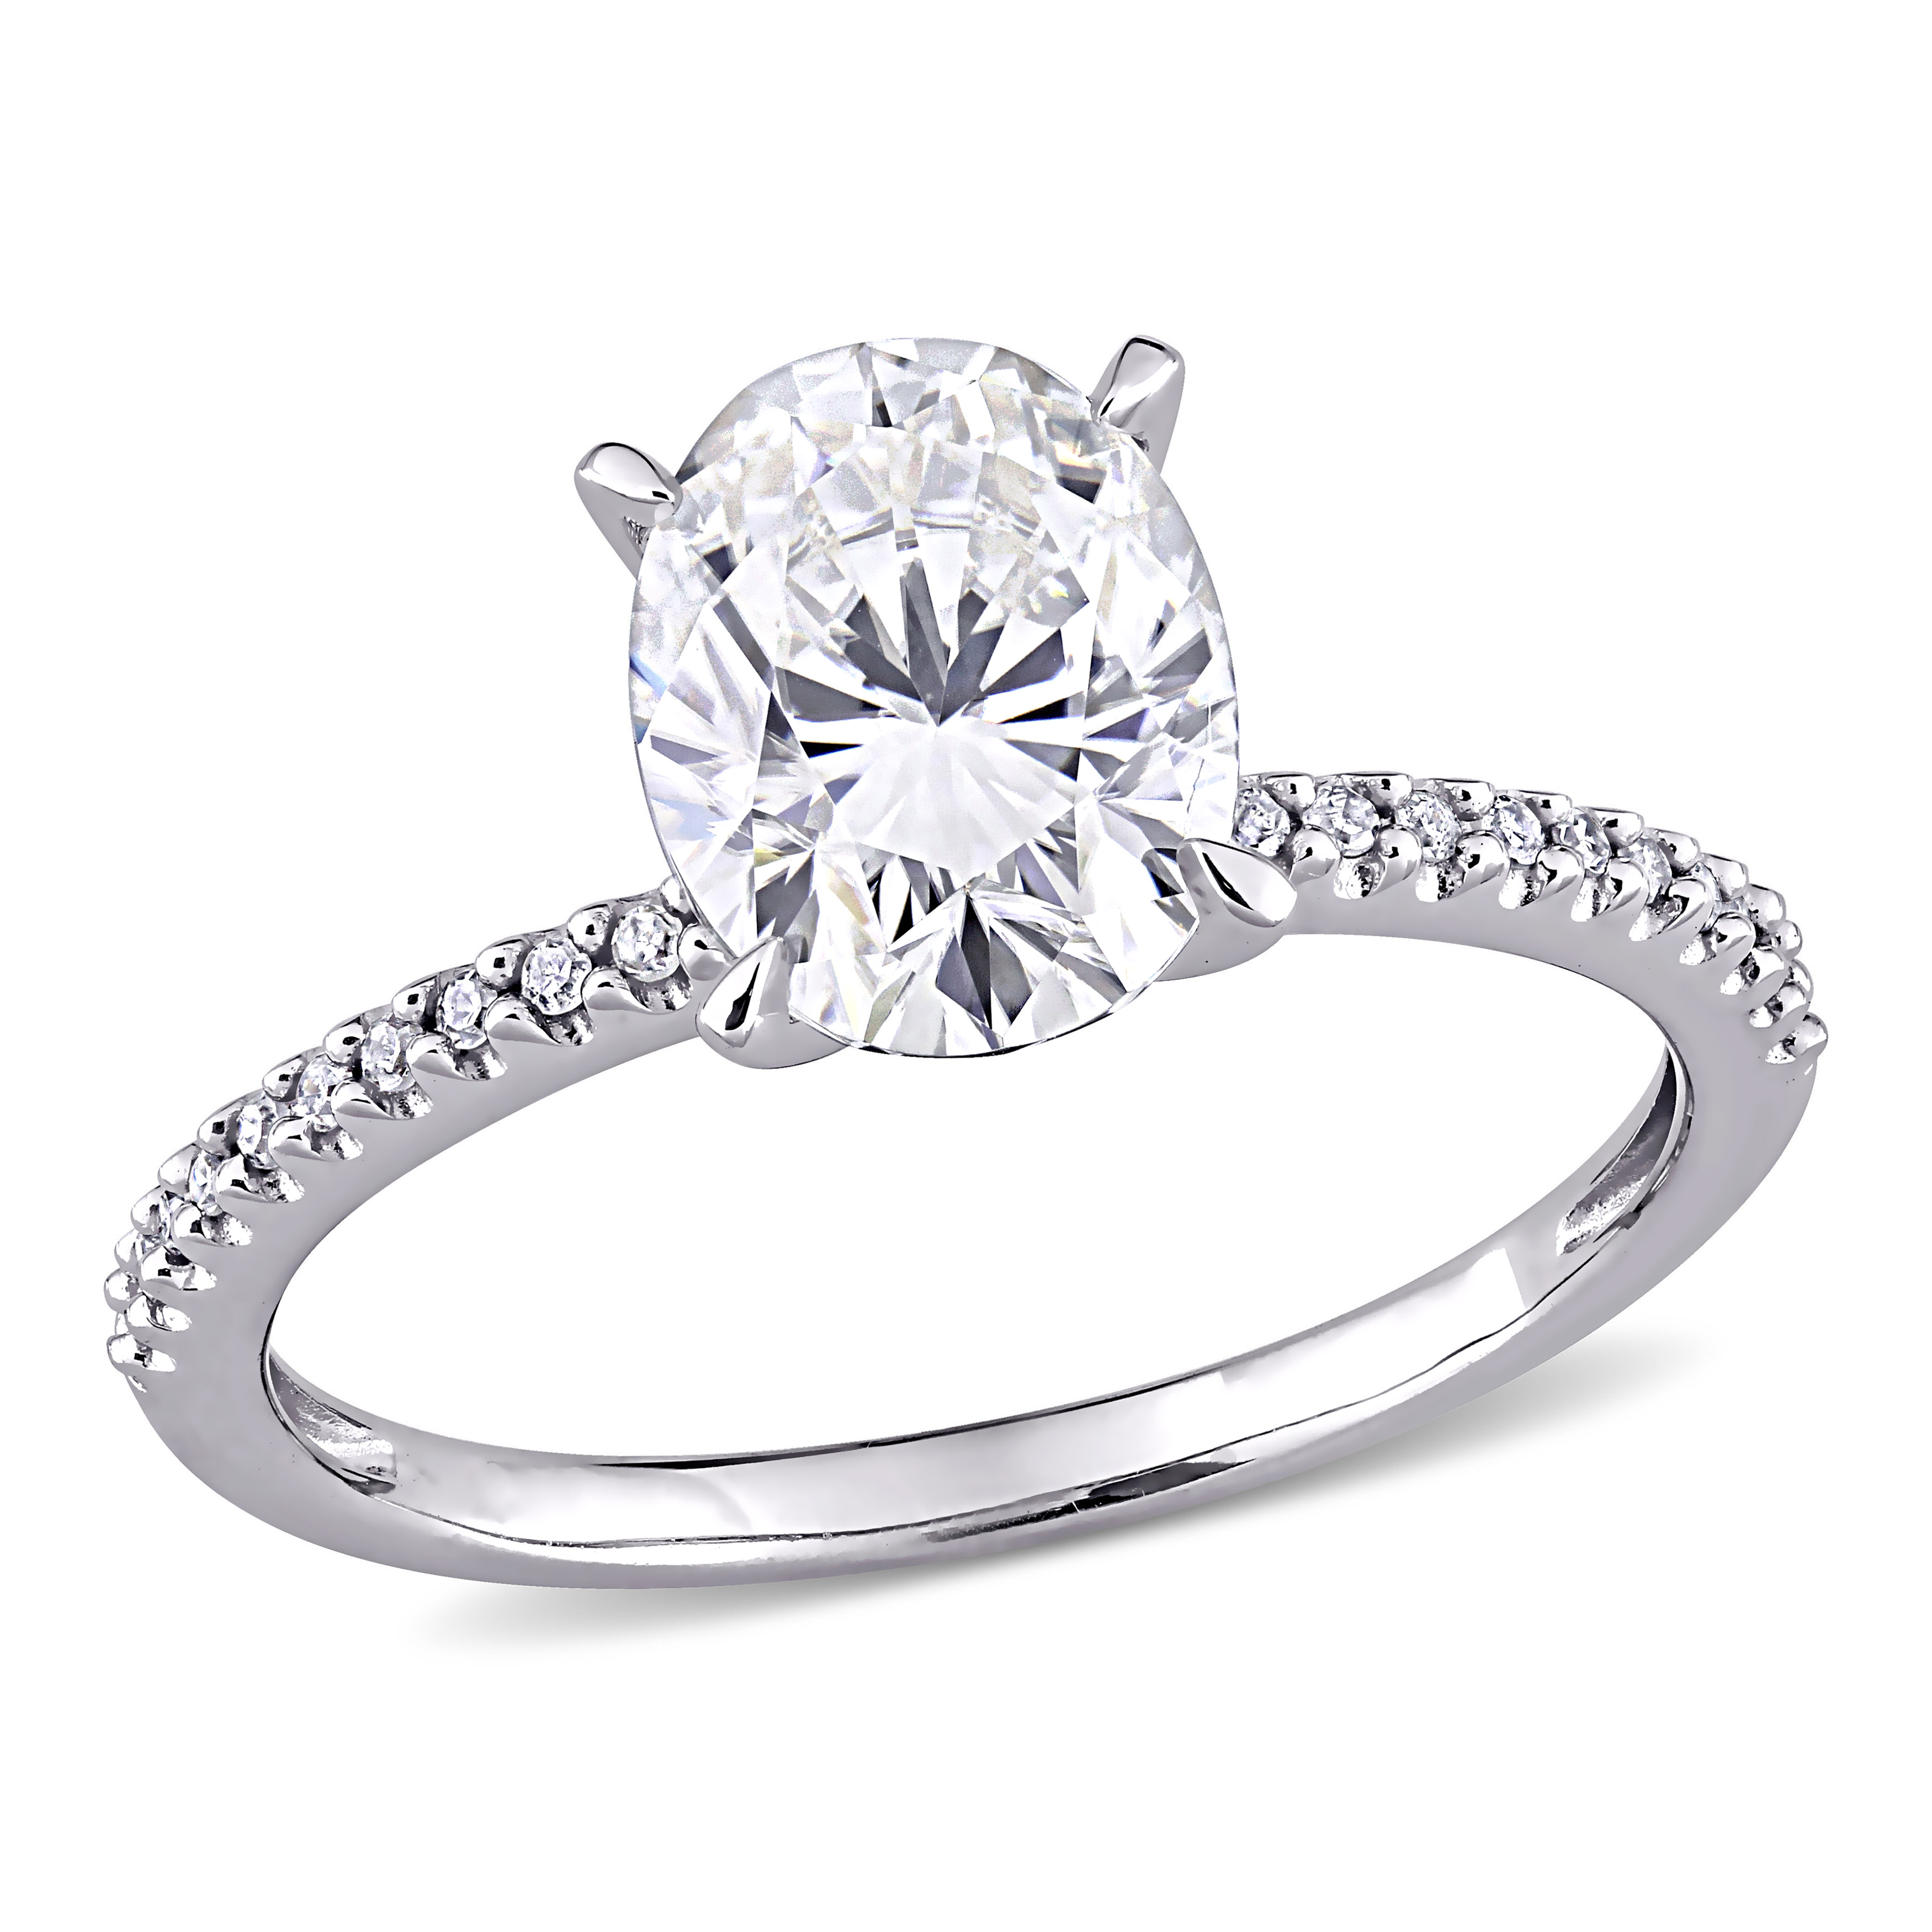 2 CT DEW Oval Created Moissanite and 1/10 CT TW Diamond Engagement Ring in 14k White Gold